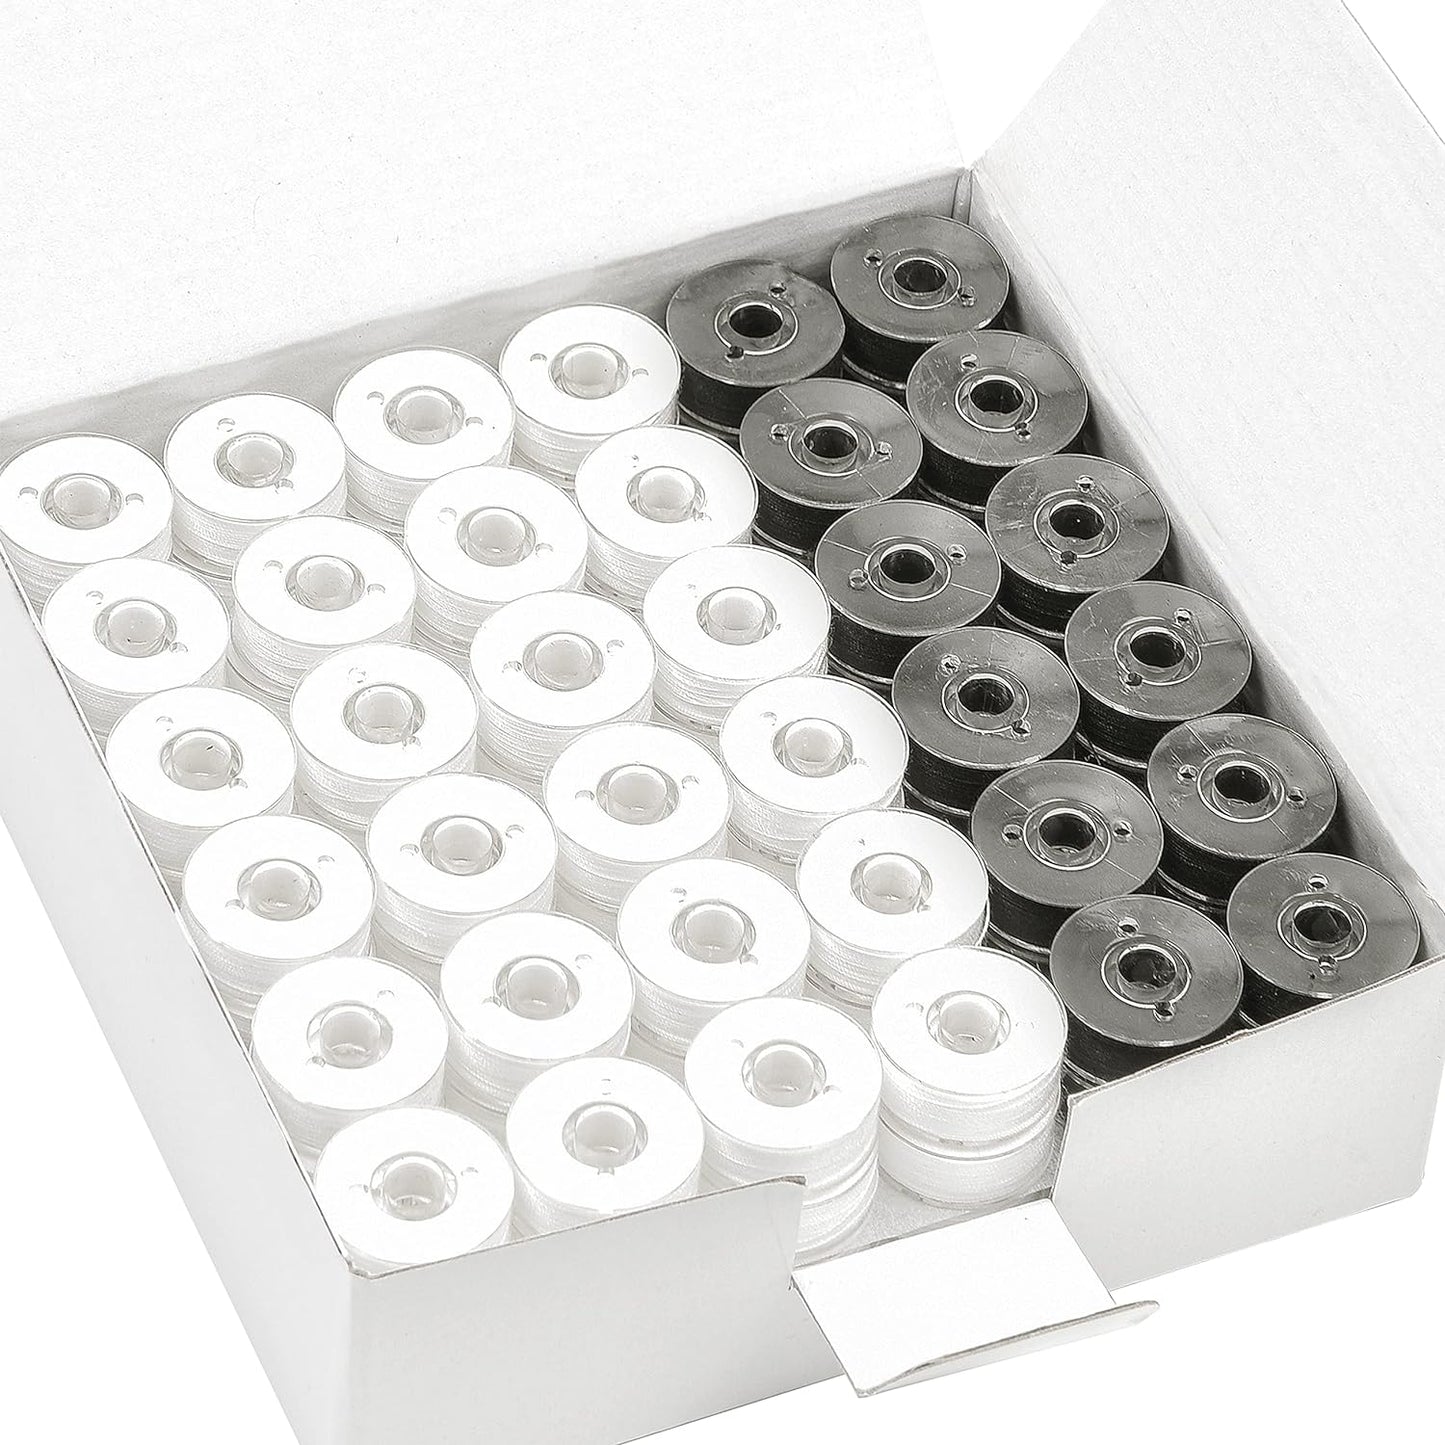 144Pcs Type L Size (SA155) (96White + 48Black) Prewound Bobbin Thread Plastic Side for Particular Embroidery and Sewing Machines - 90 Weight Cottonized Soft Feel Polyester Sewing Thread